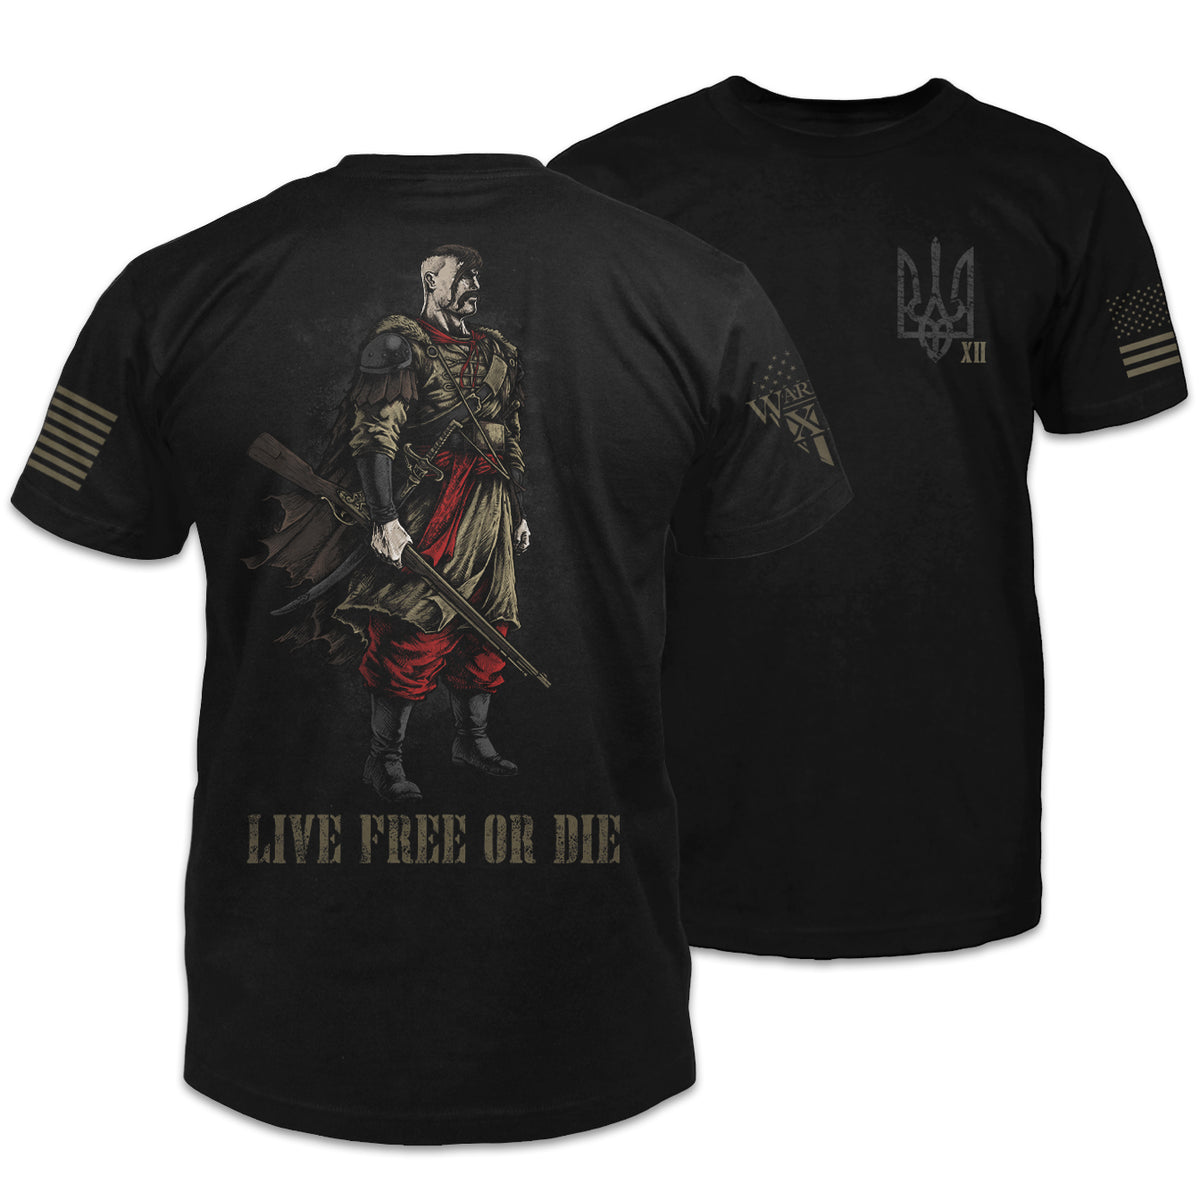 Front & back black t-shirt with a cossack warrior with the words "live free or die" printed on the back of the shirt.